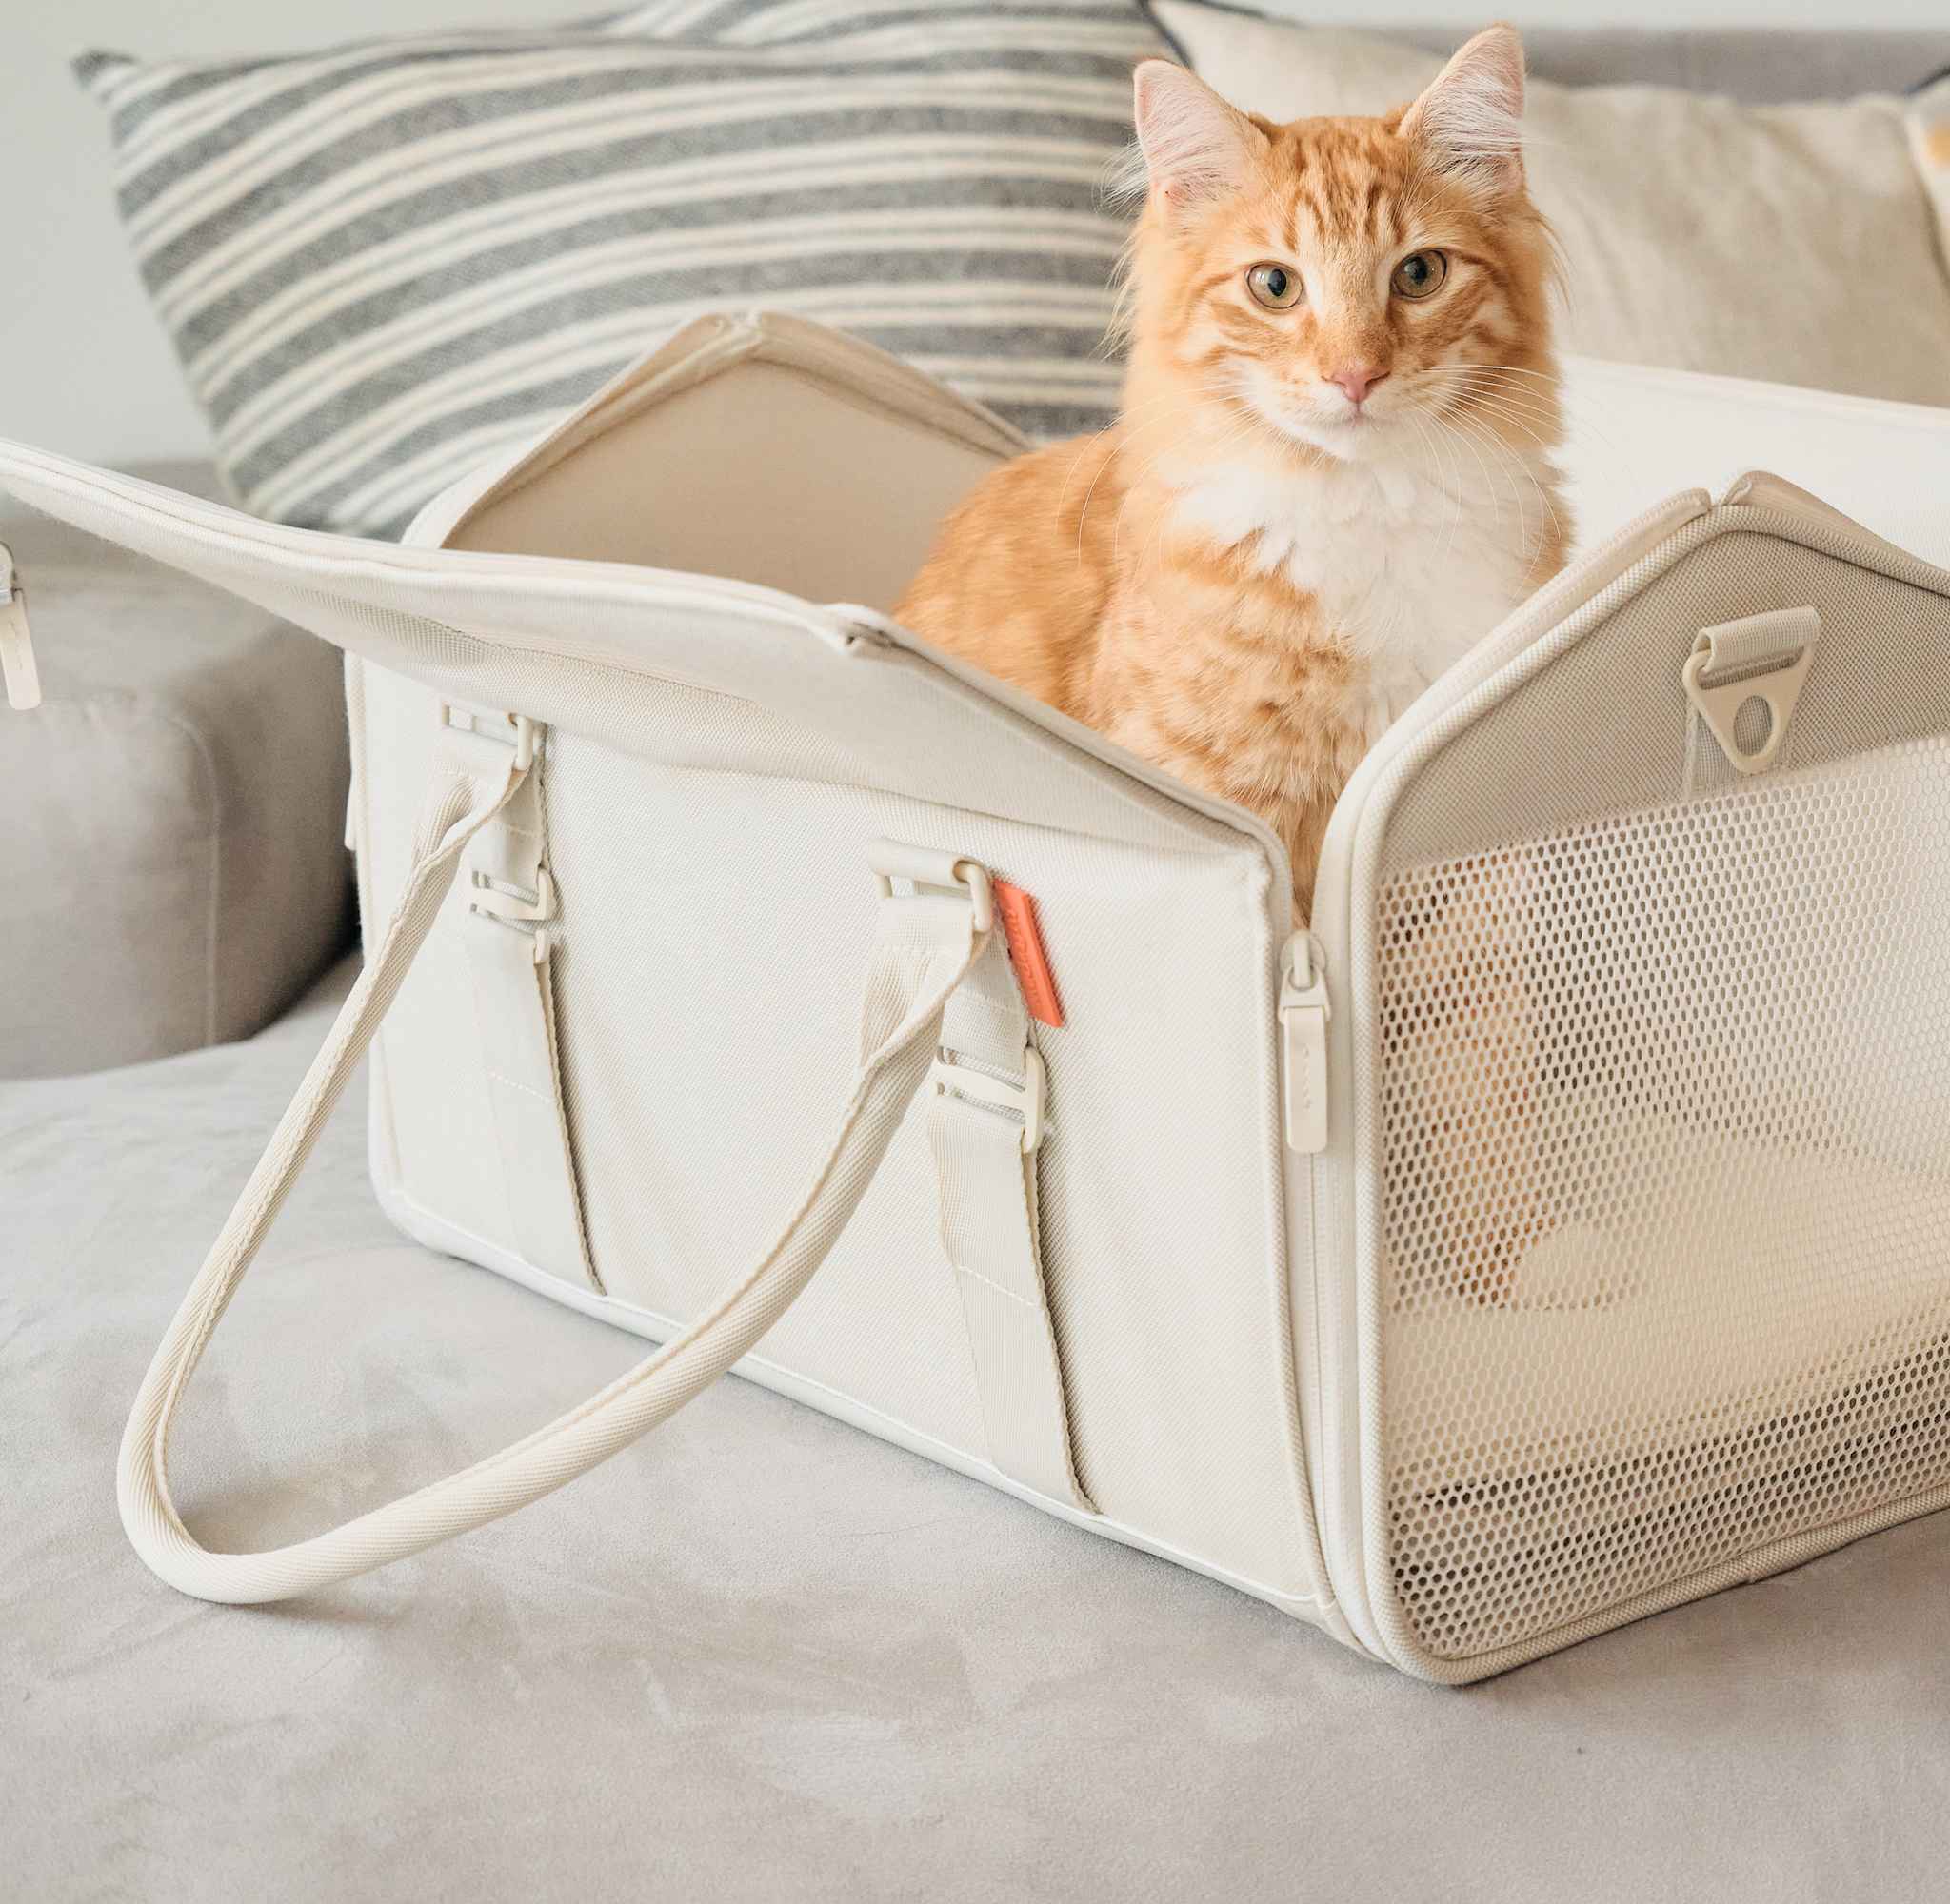 A Guide for Choosing the Best Cat Carrier